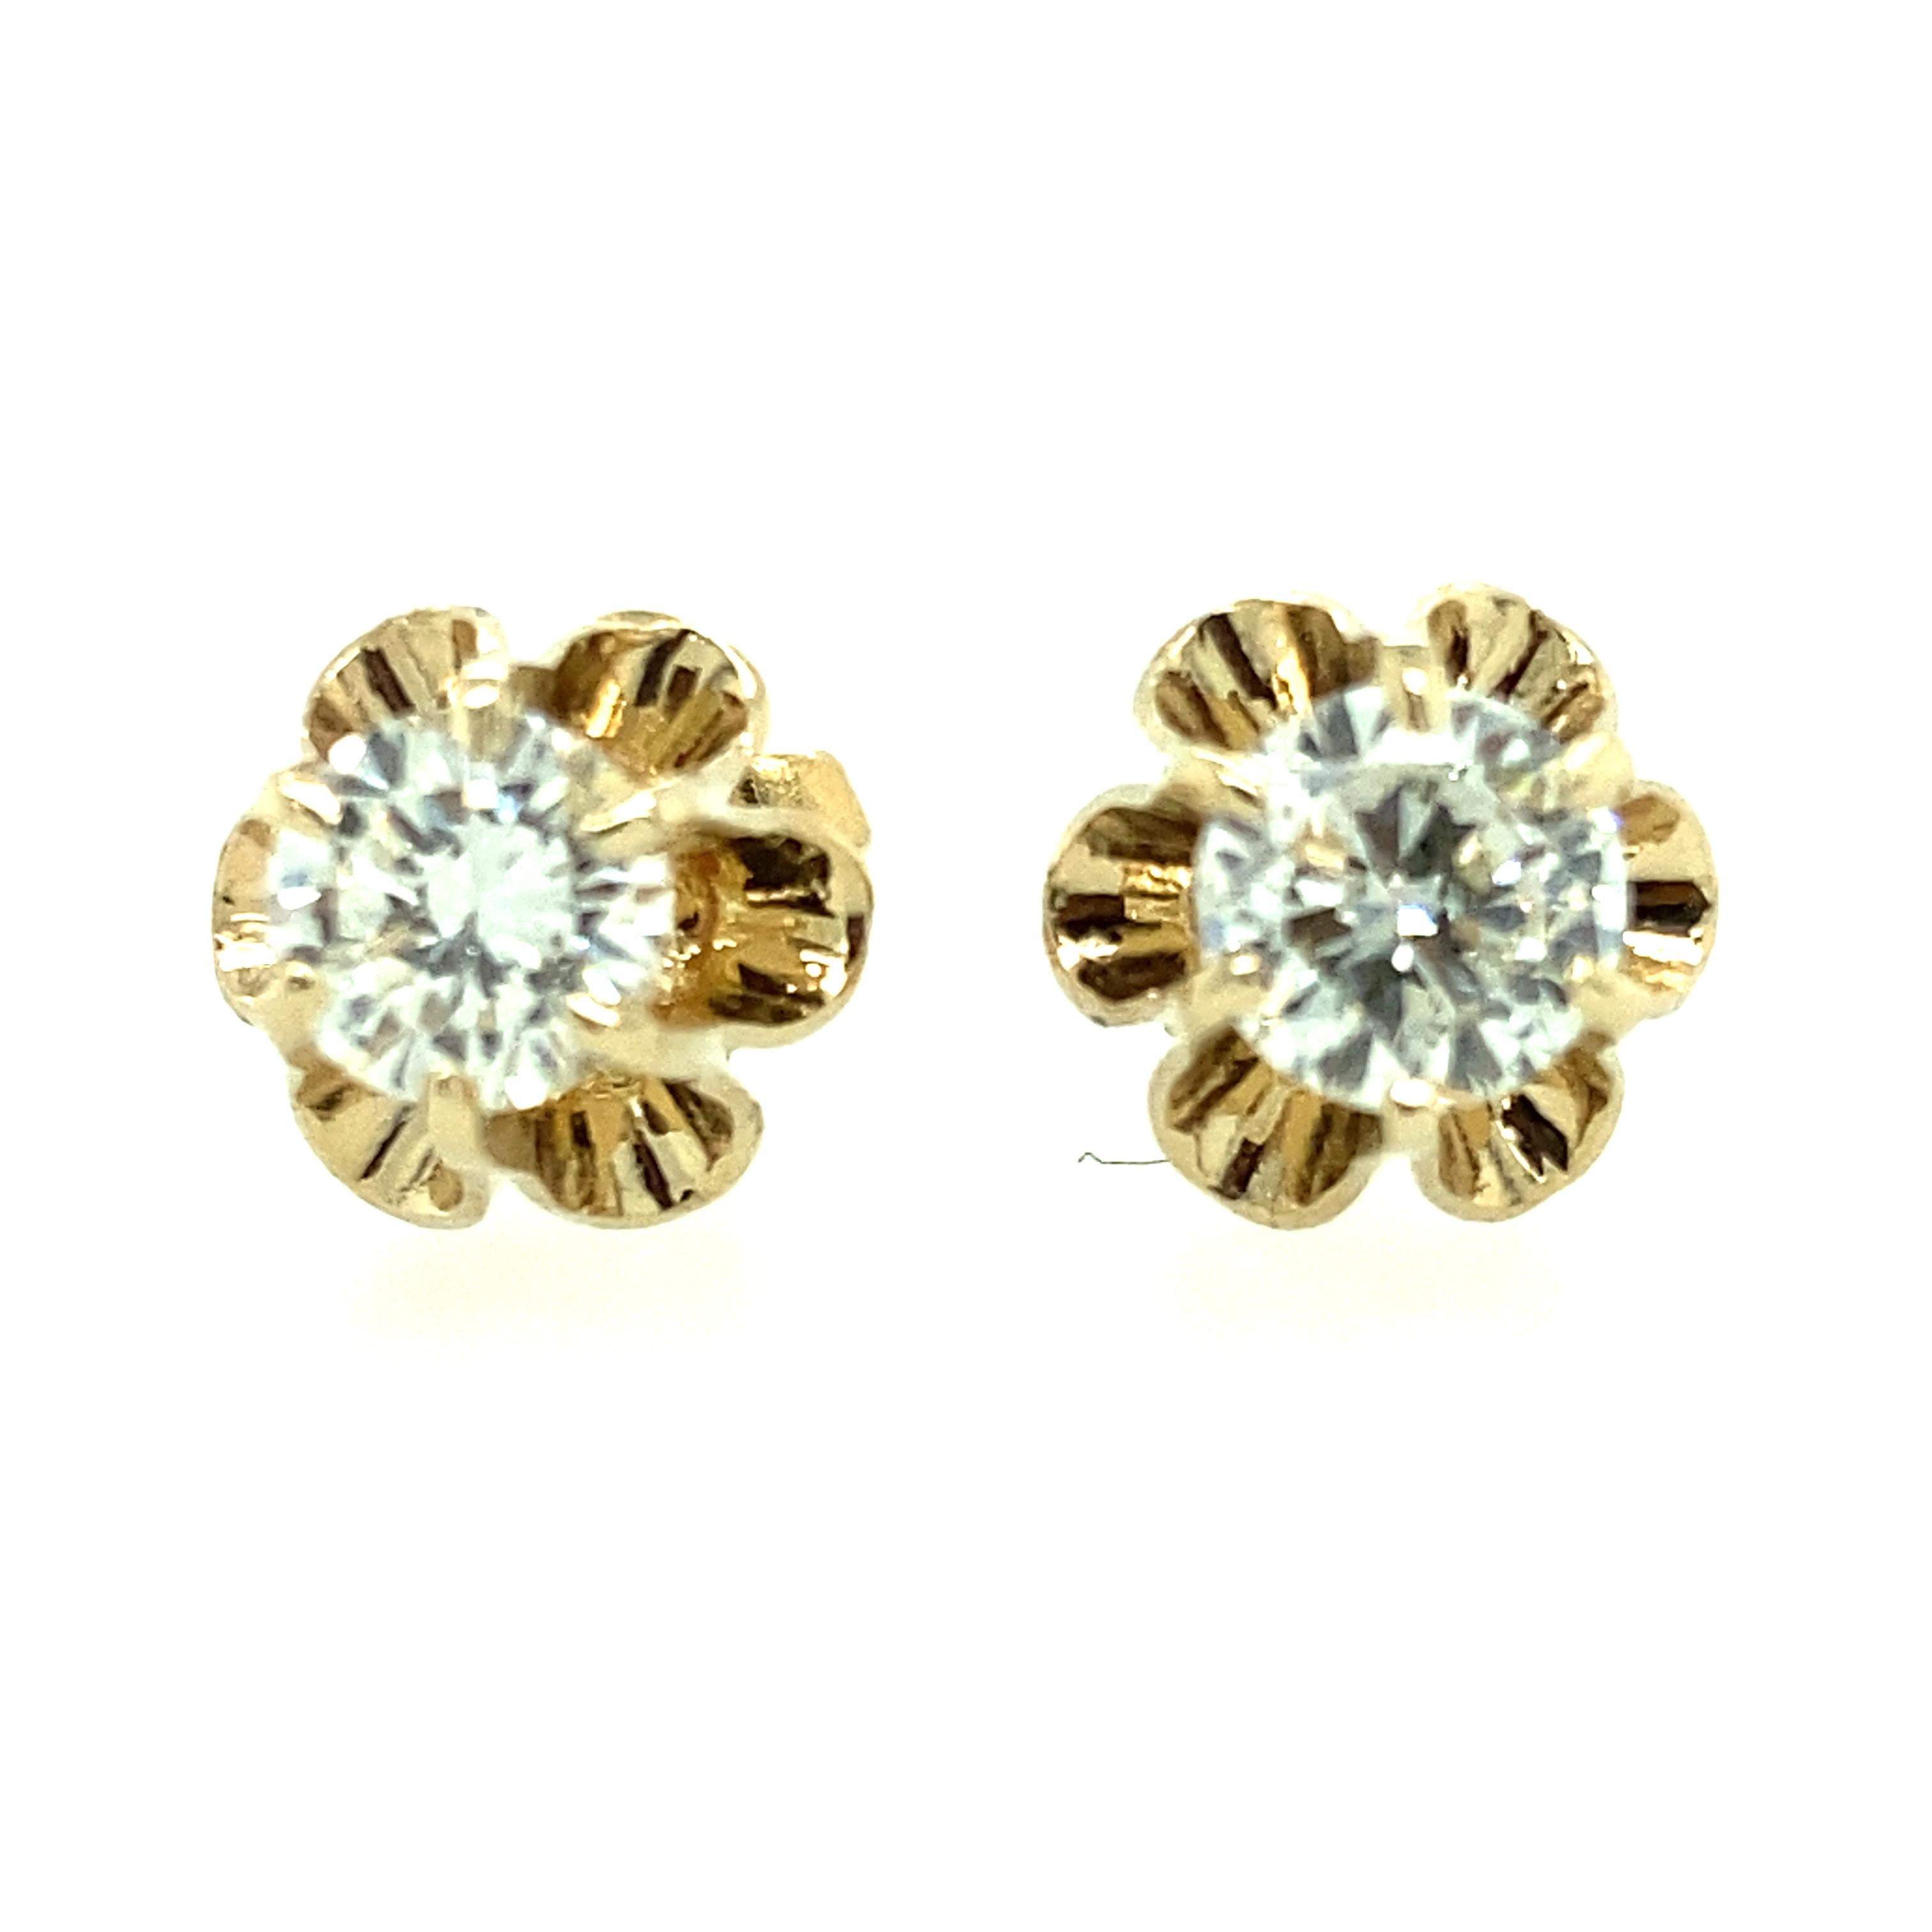 One pair of 14 karat yellow gold estate buttercup diamond earrings, each set with one round brilliant cut diamond, approximately 1.00 carat total weight , with matching I/J color and SI clarity. 